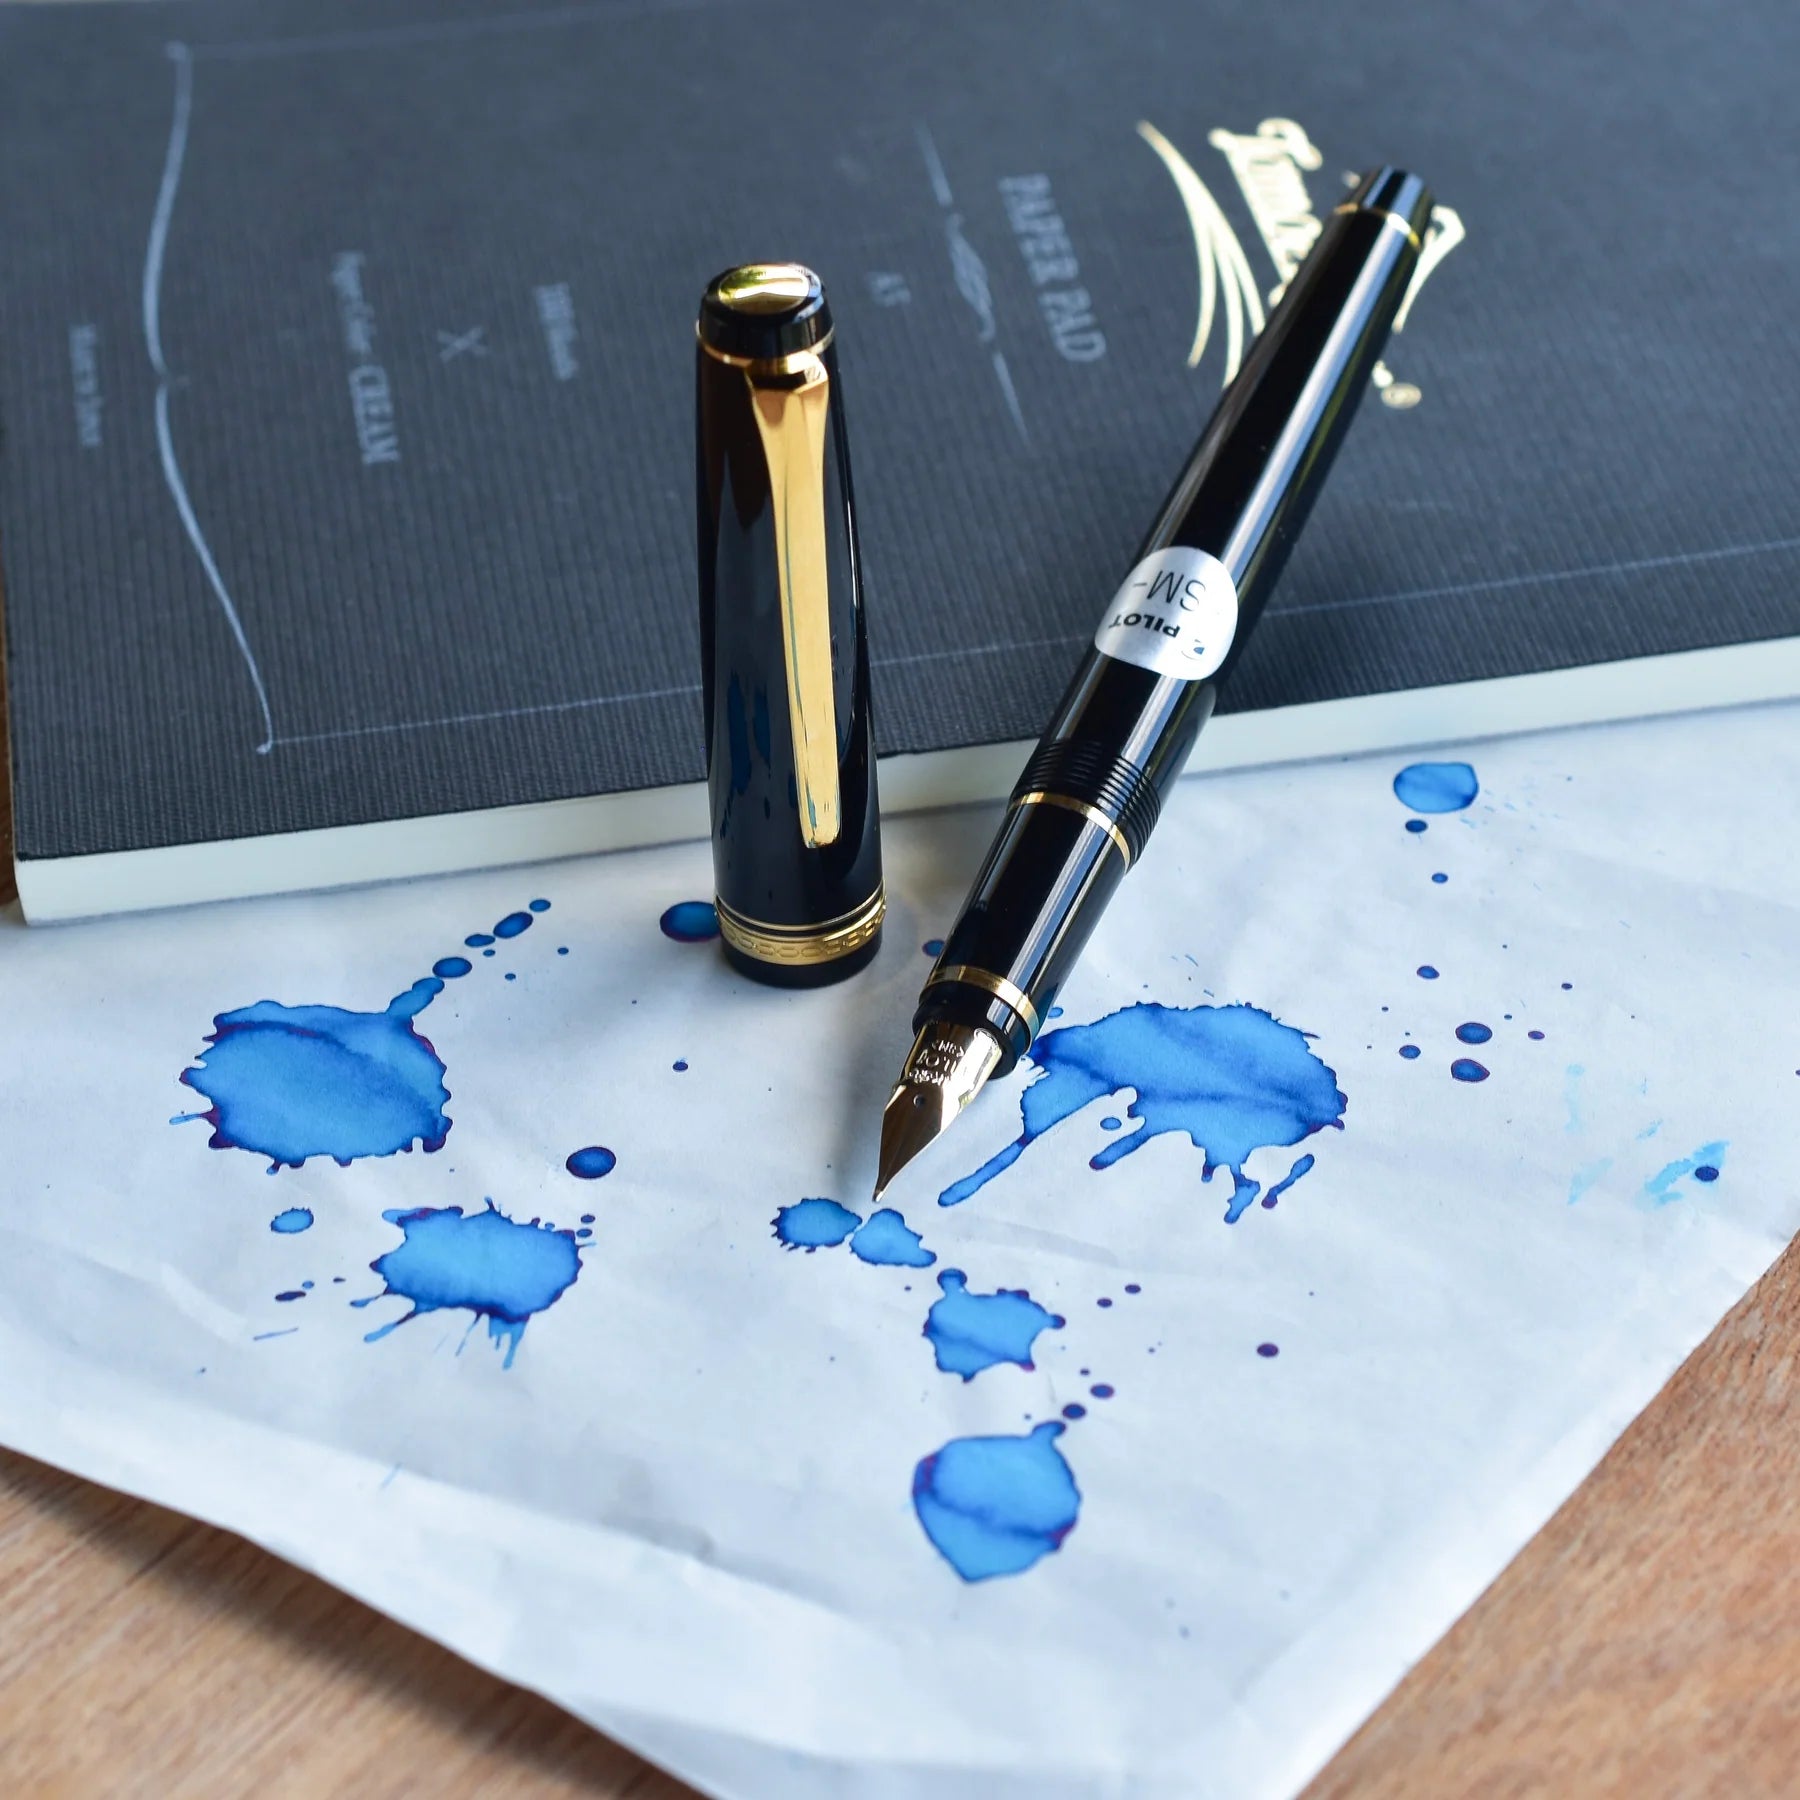 Best Pens for Writing — The Handcrafted Story